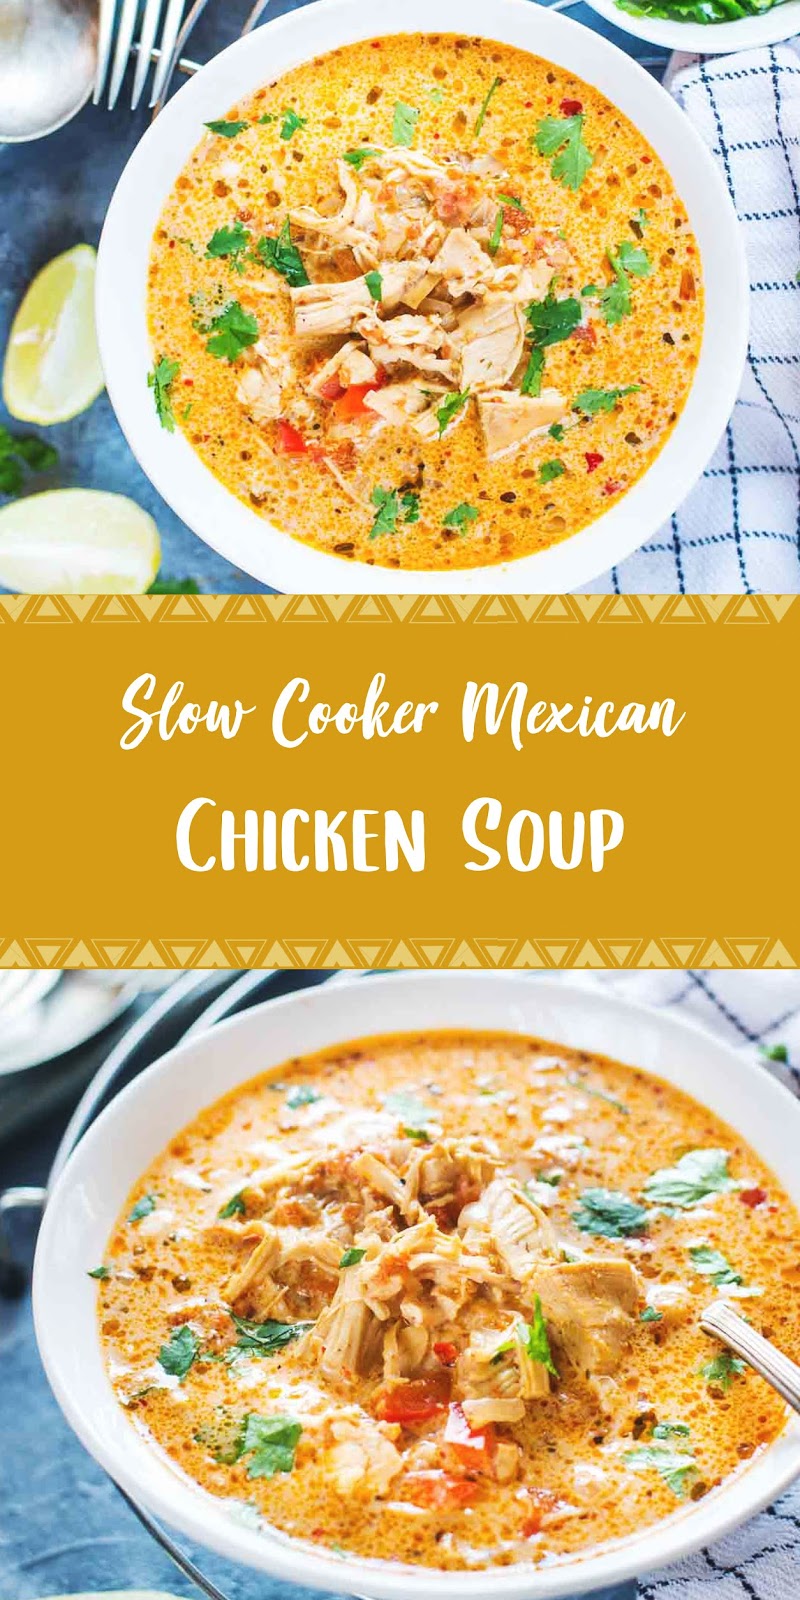 Slow Cooker Mexican Chicken Soup - Food Recipes